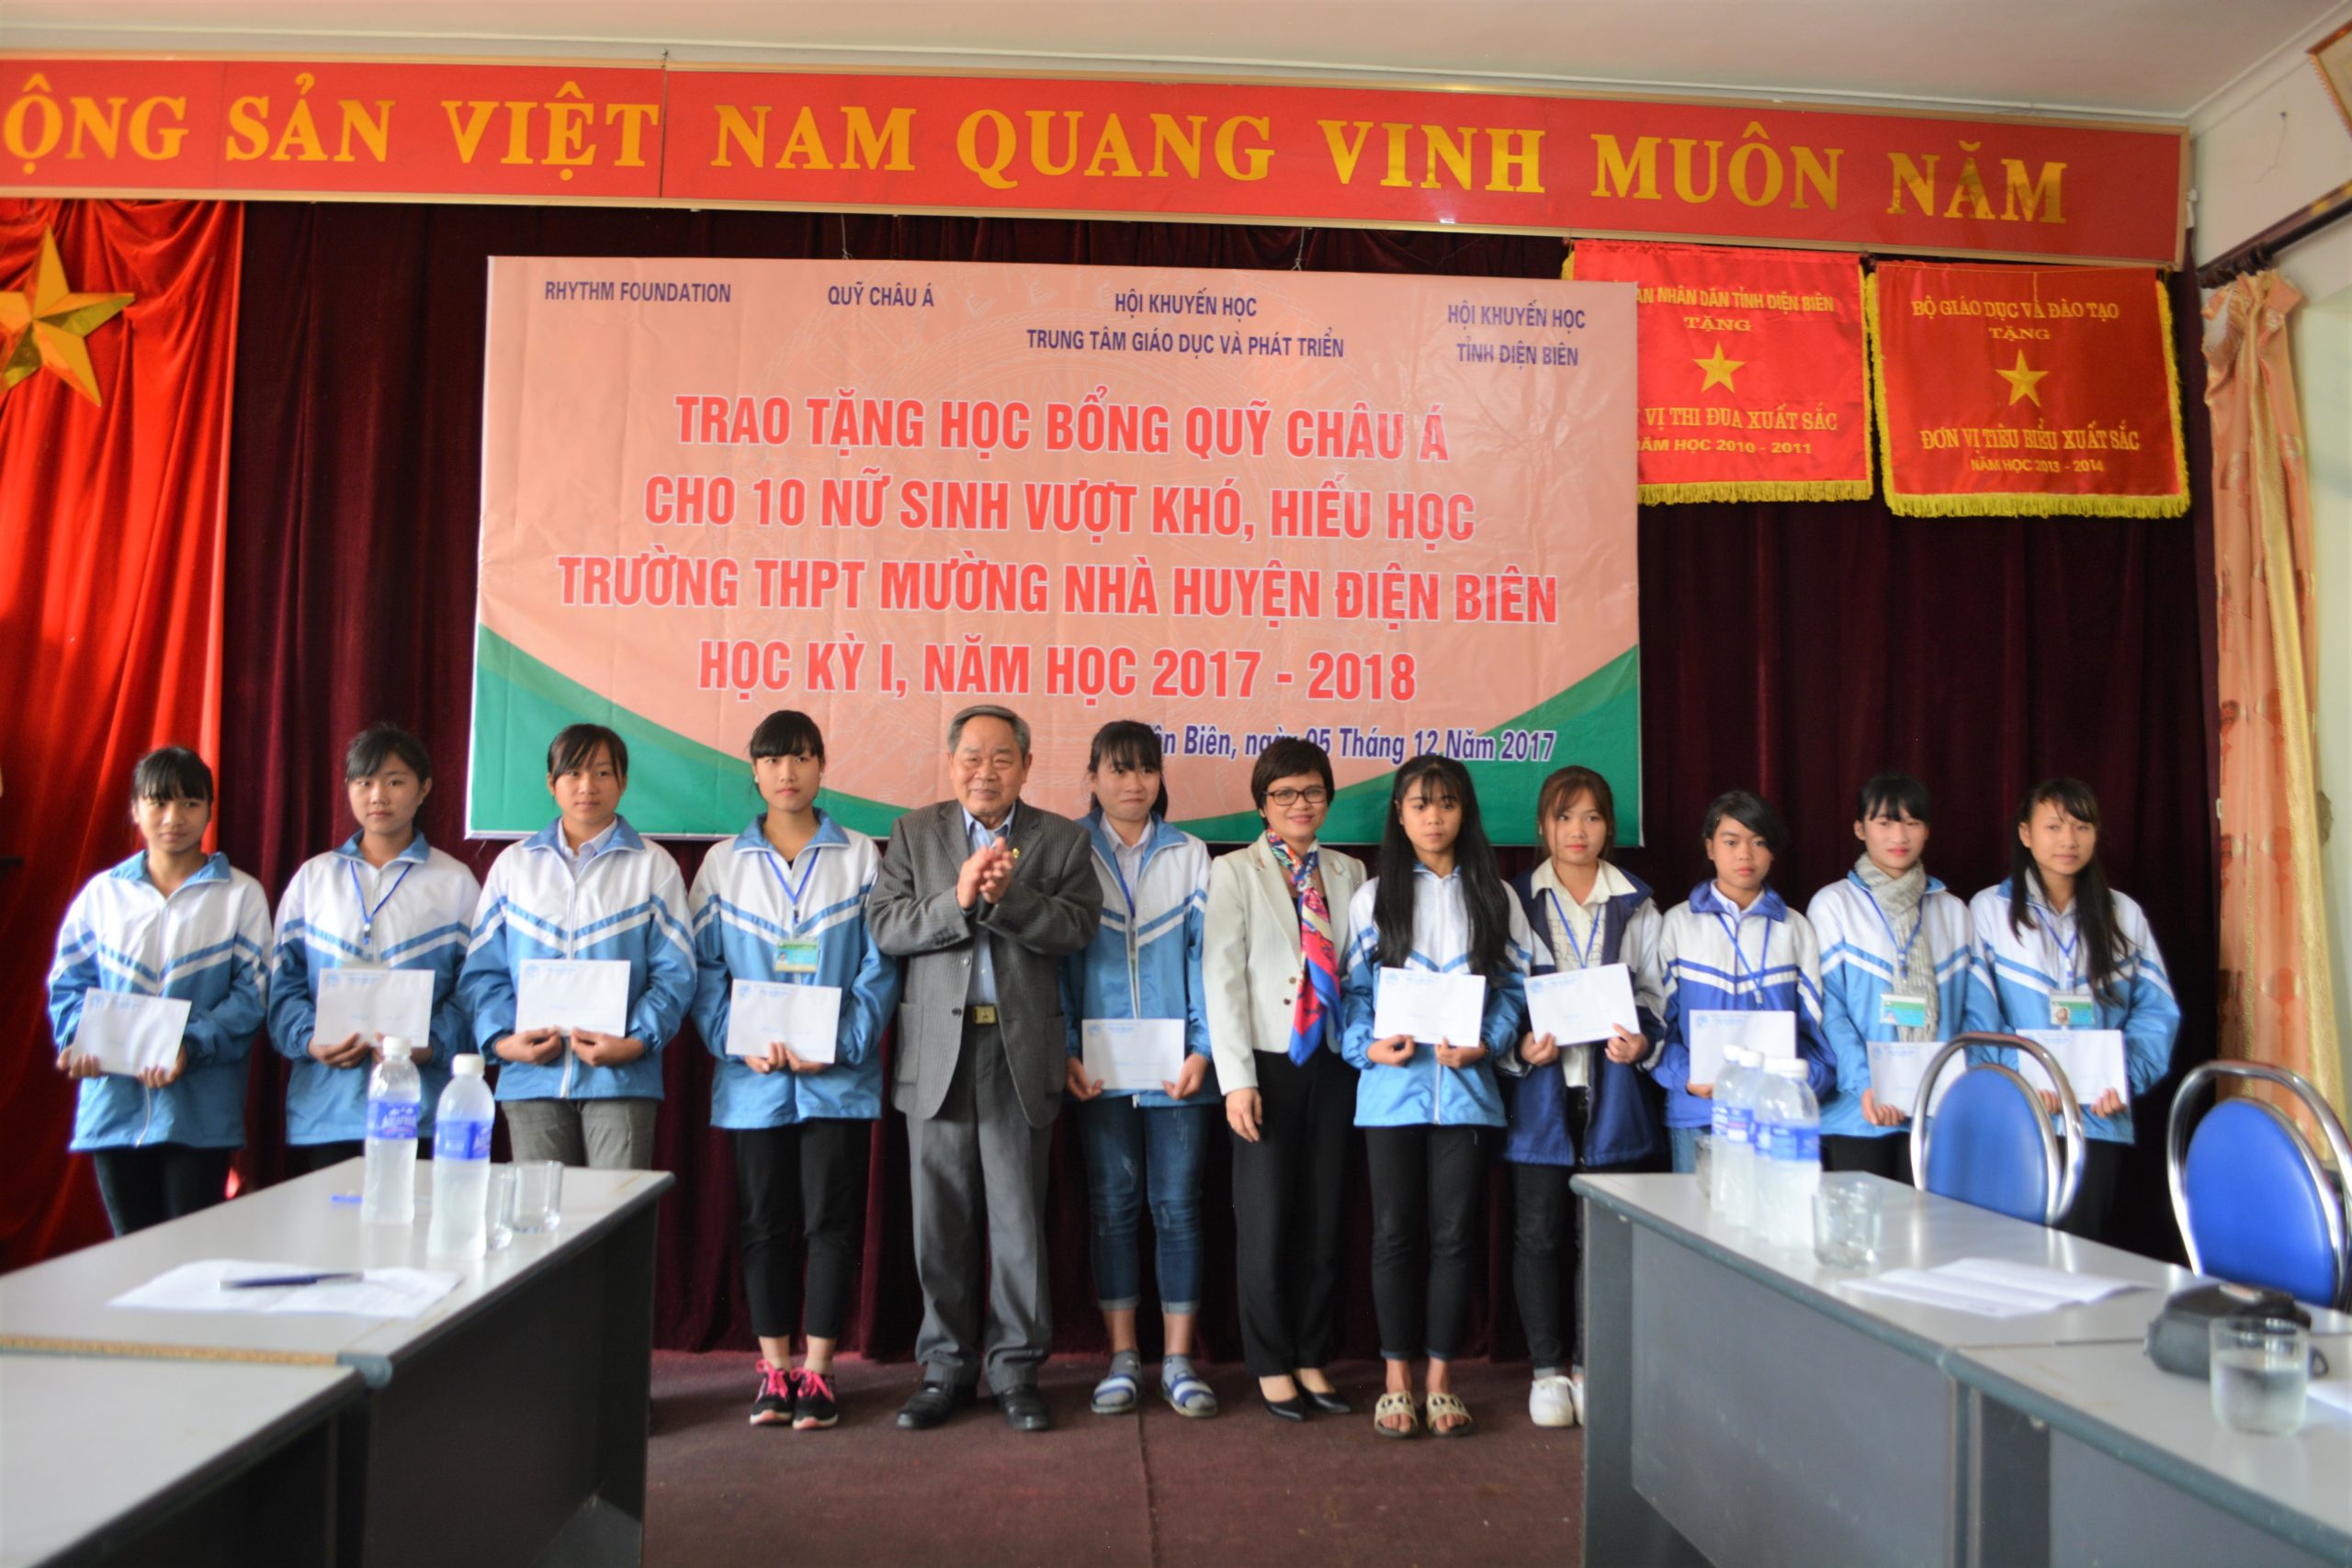 RYTHM Scholars in Vietnam Programme Launched to Empower Young Girls through Education